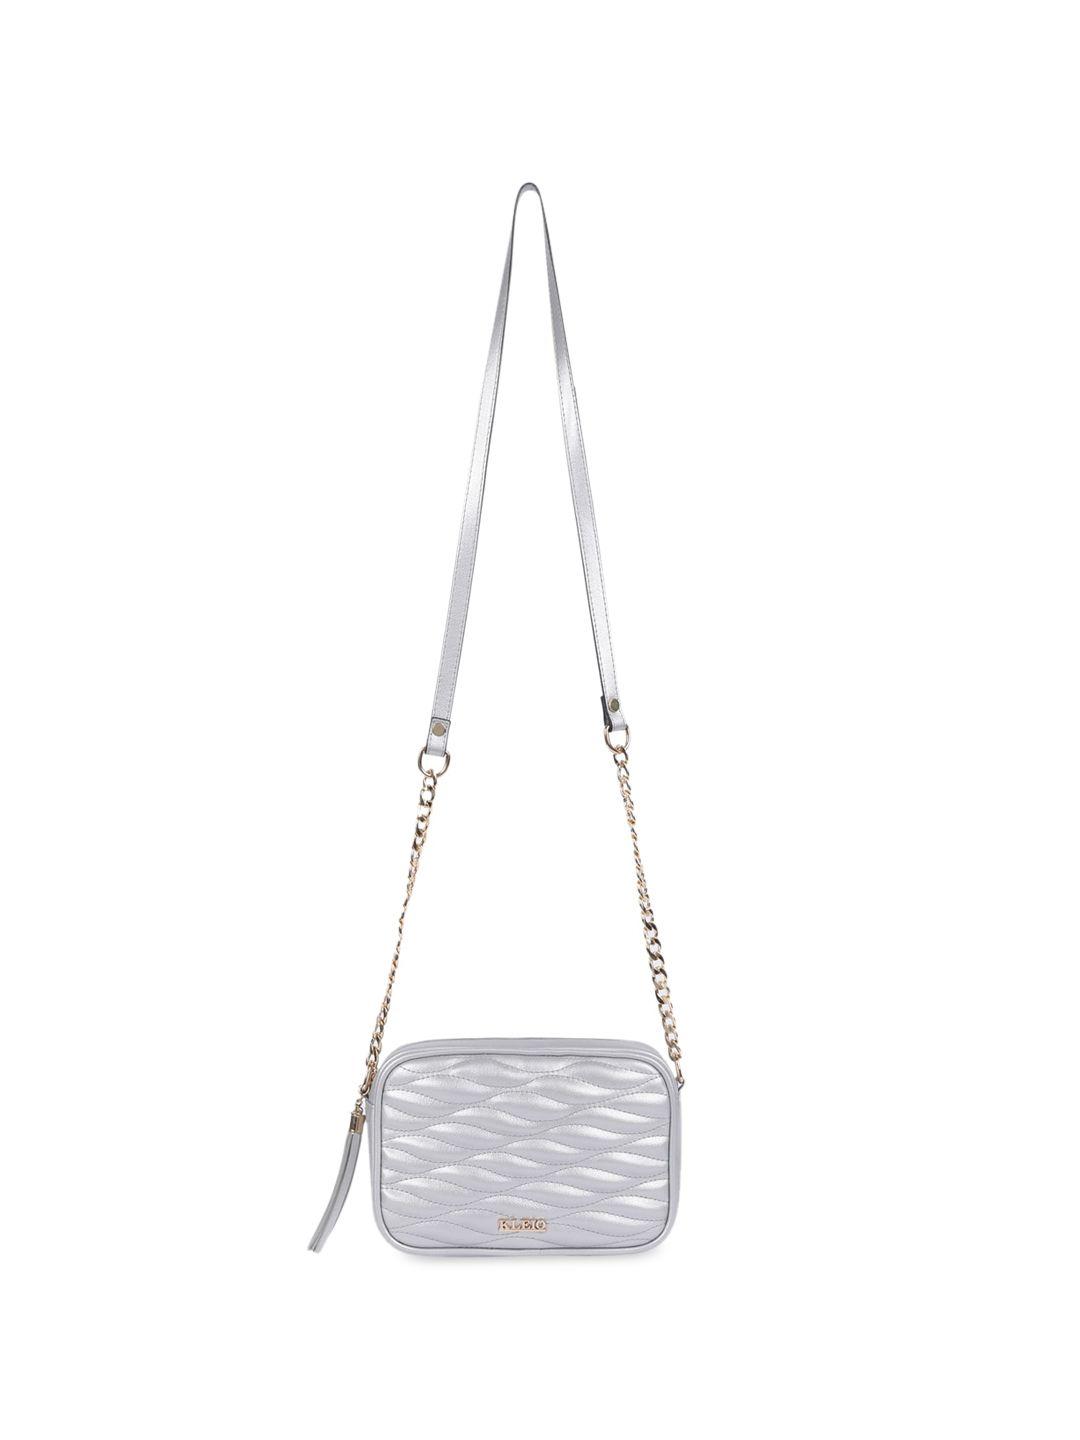 kleio quilted textured structured sling bag